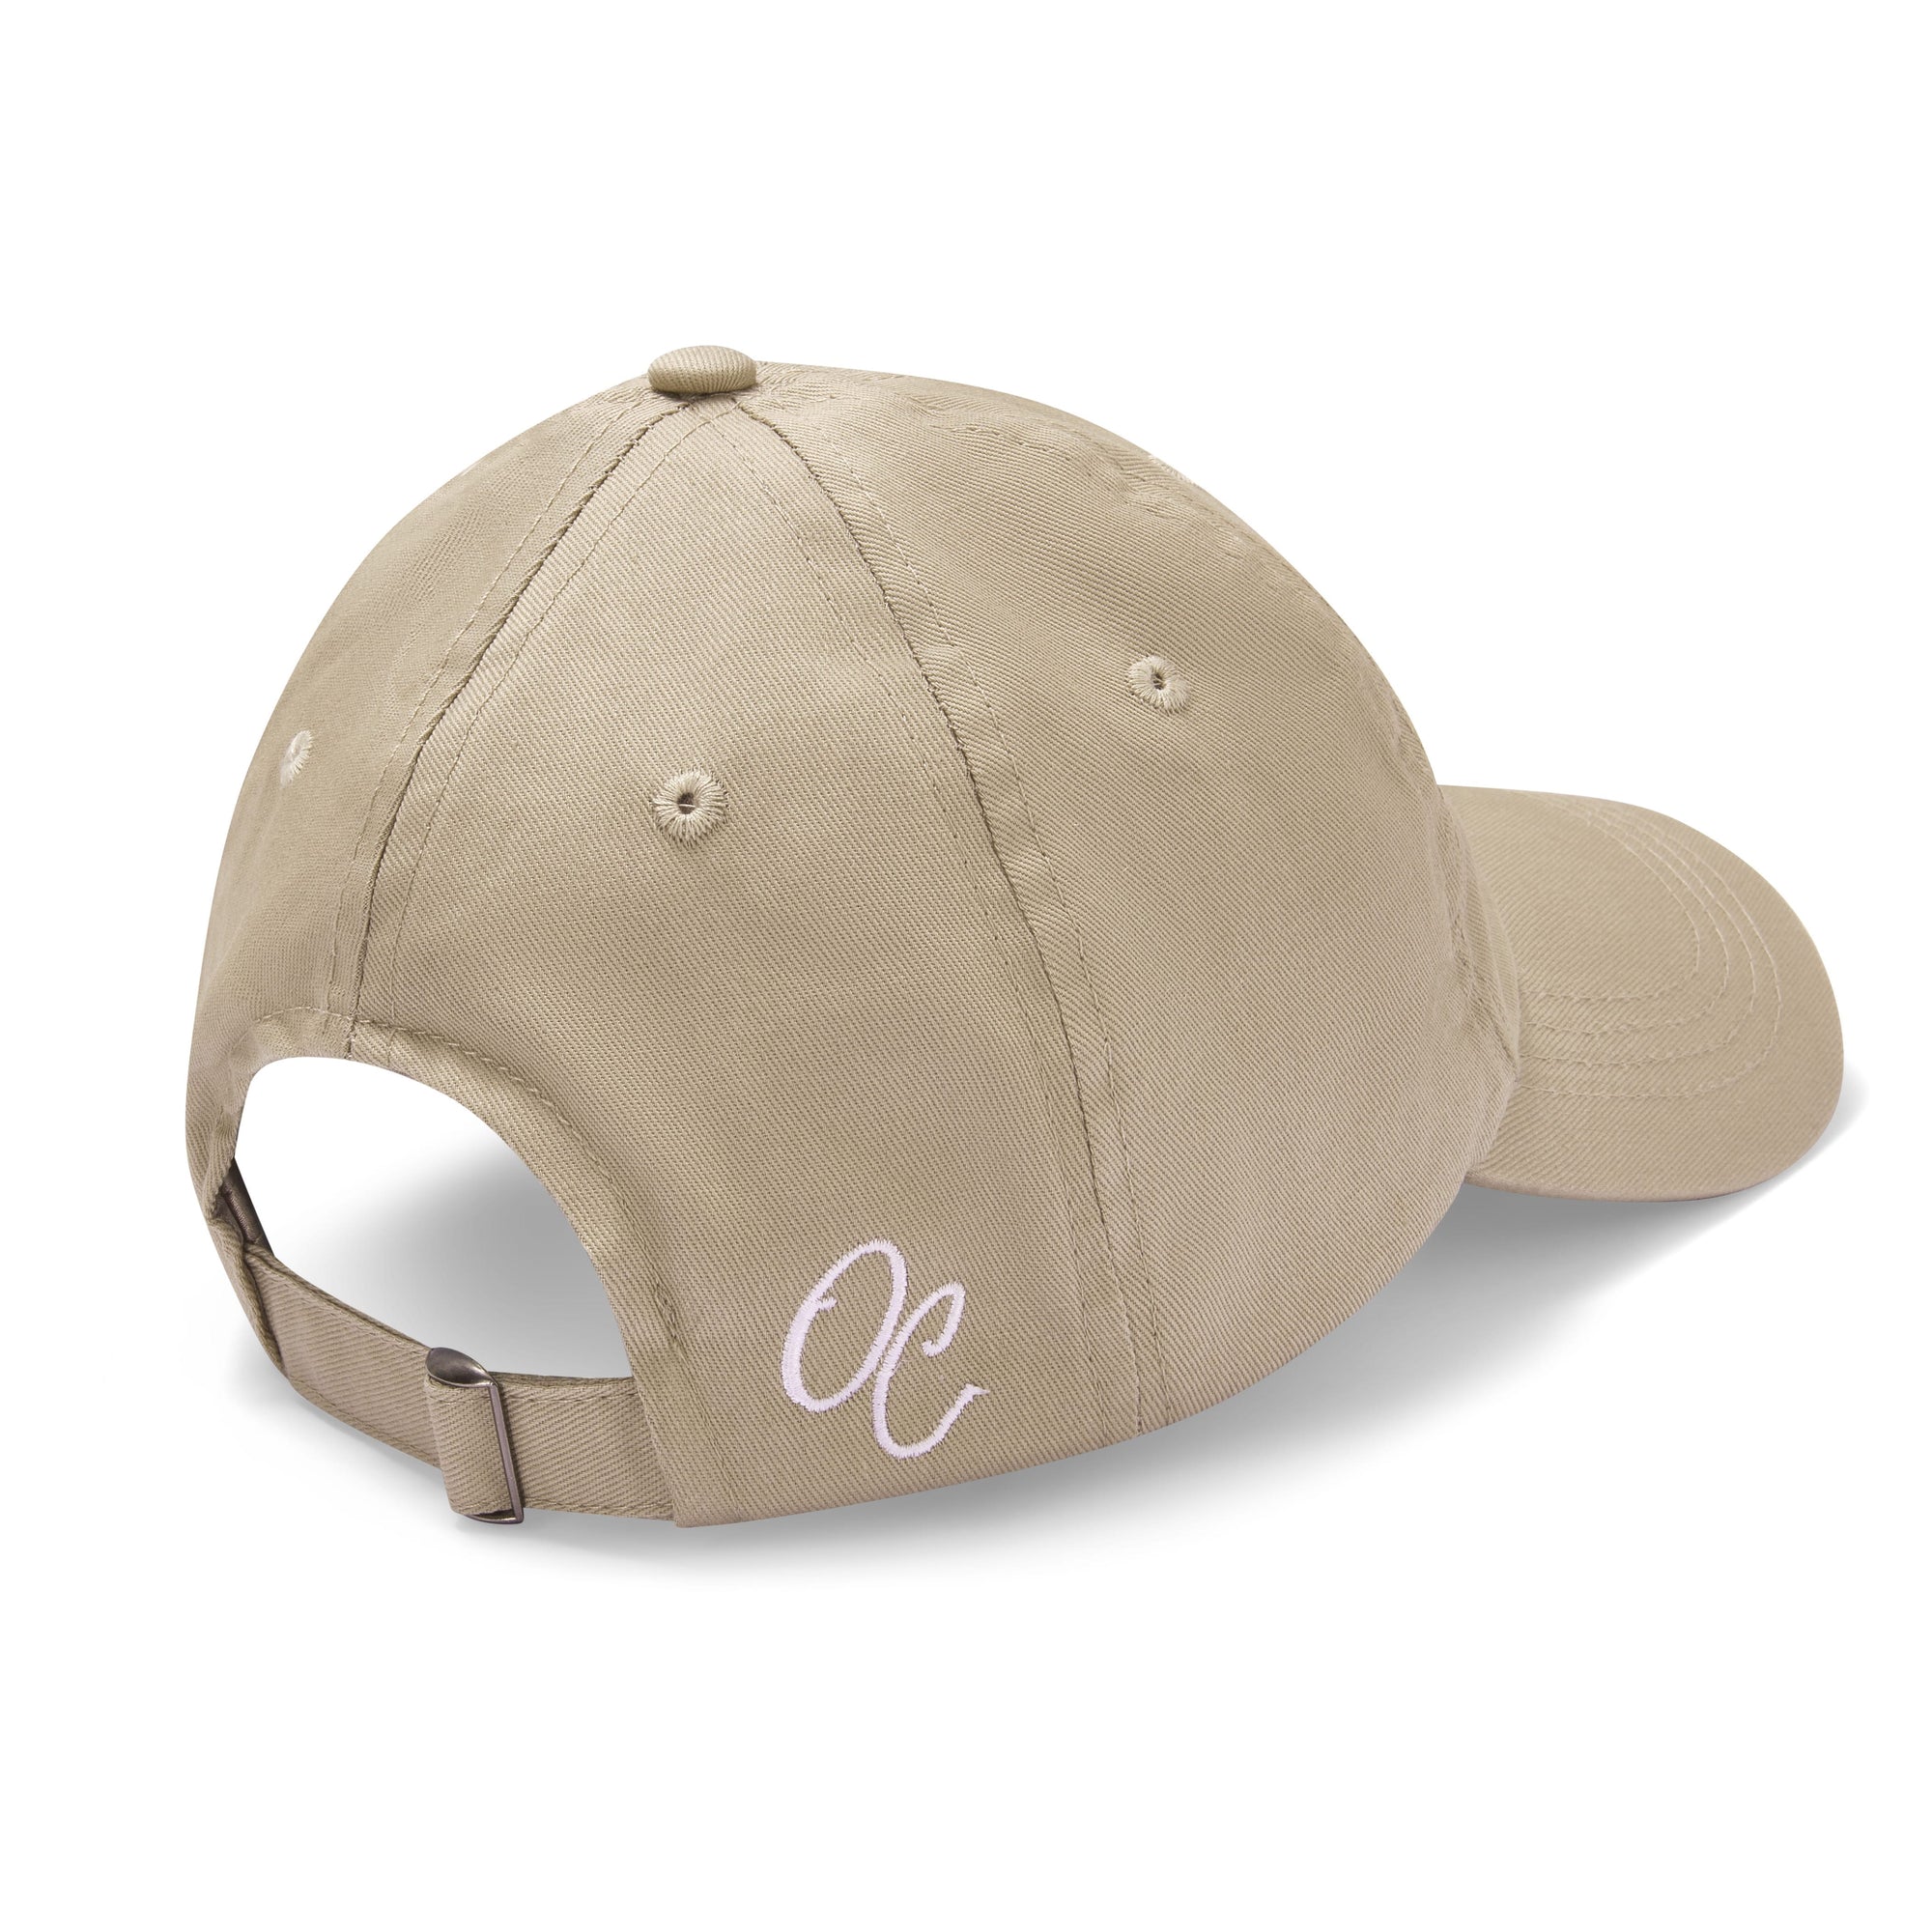 Only Curls Satin Lined Baseball Hat  - Beige - Only Curls